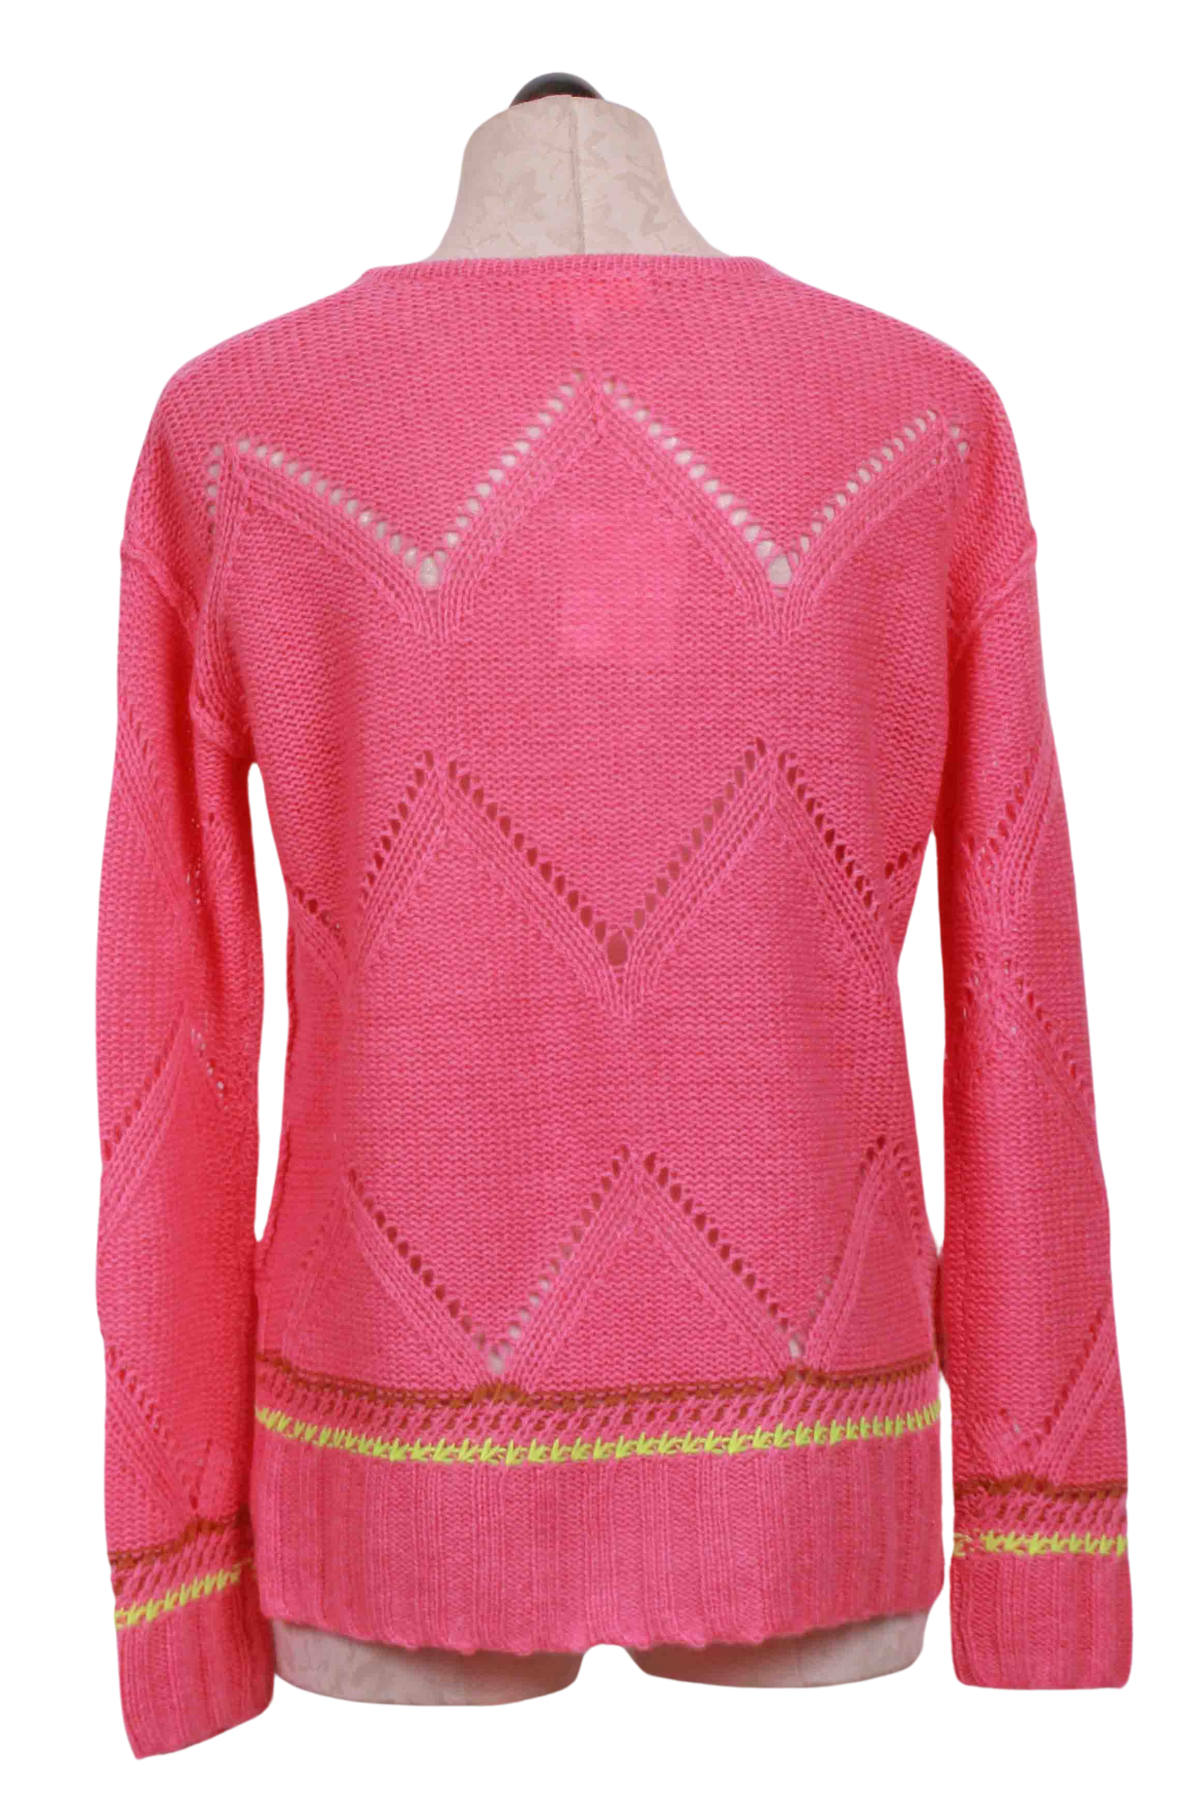 back view of Summer Softie V Neck Sweater by Lisa Todd in Pink Punch